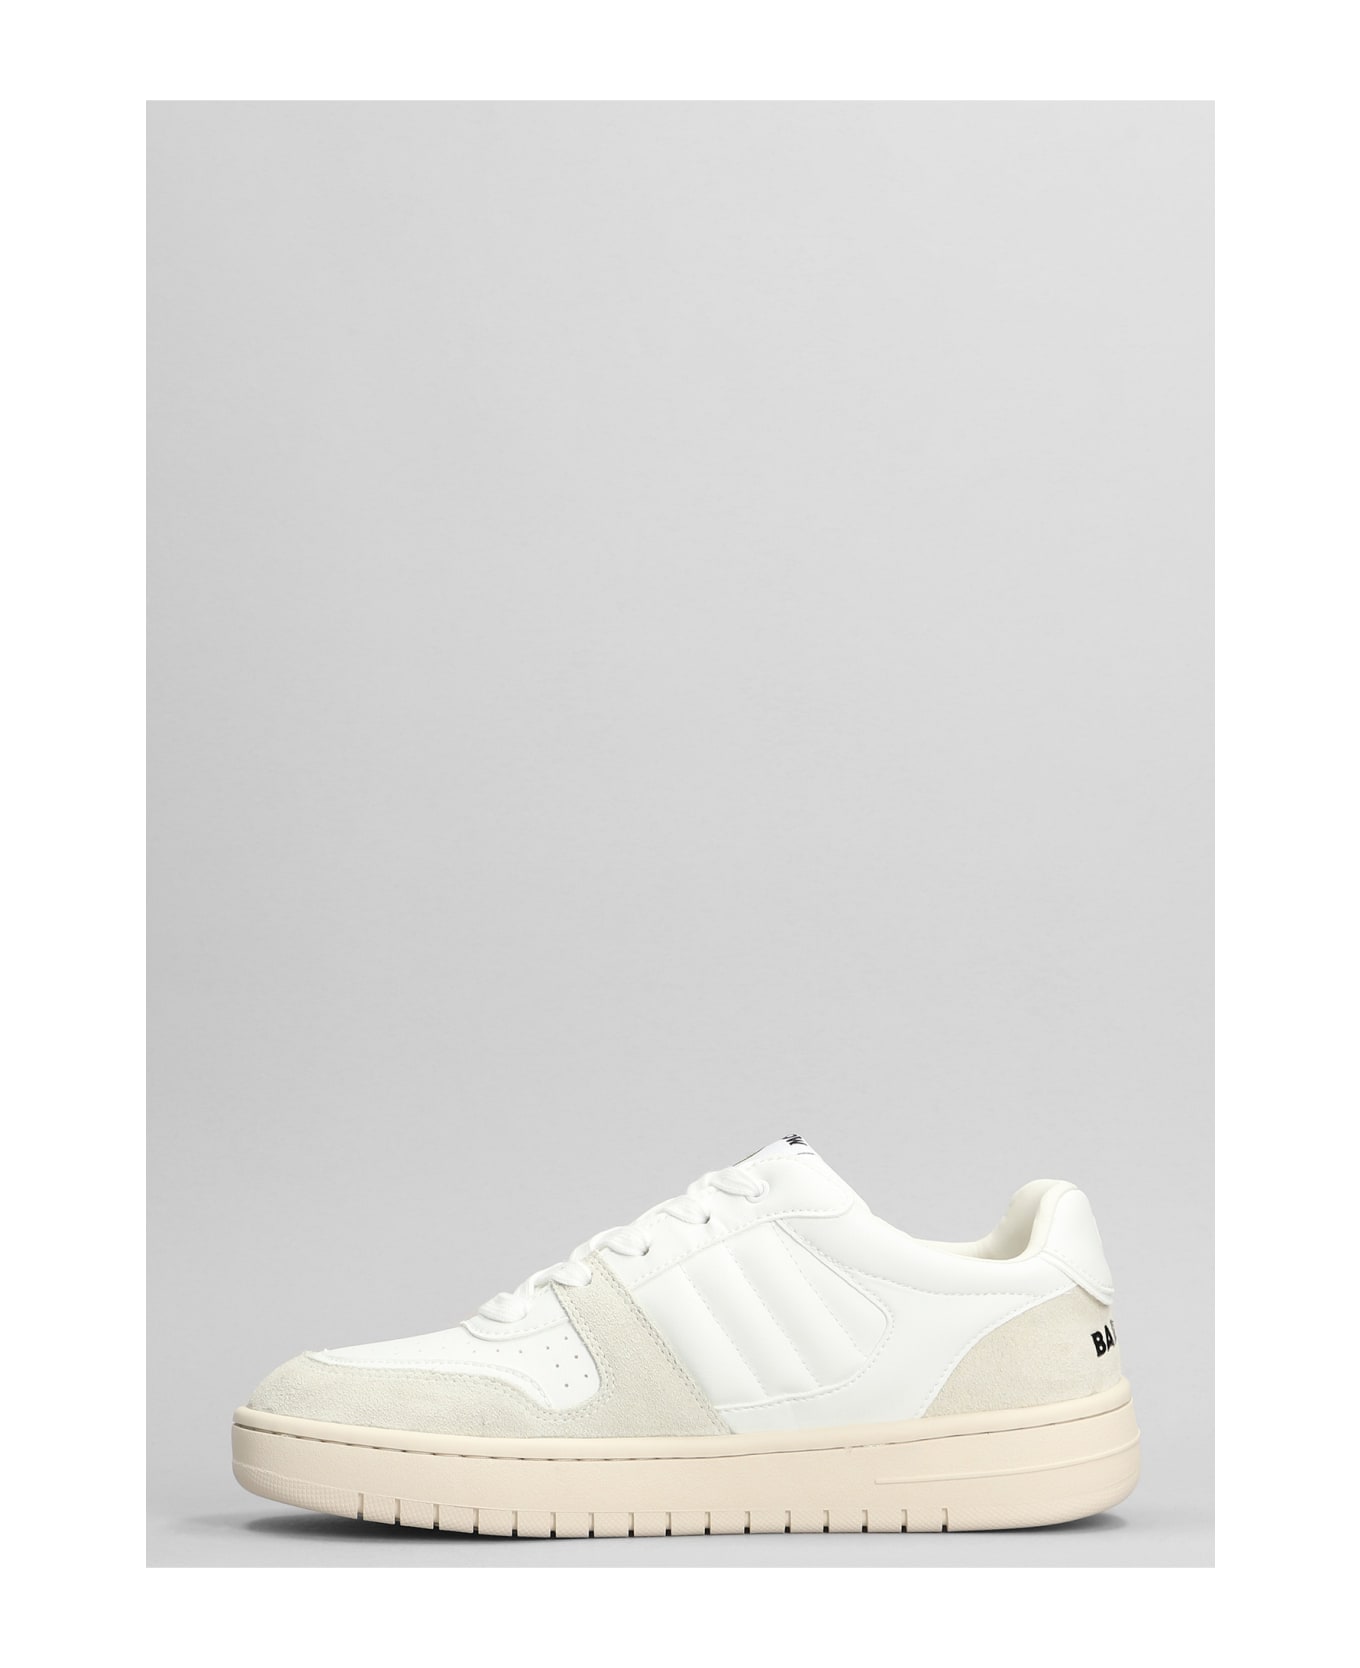 Barrow Sneakers In White Suede And Leather - white スニーカー